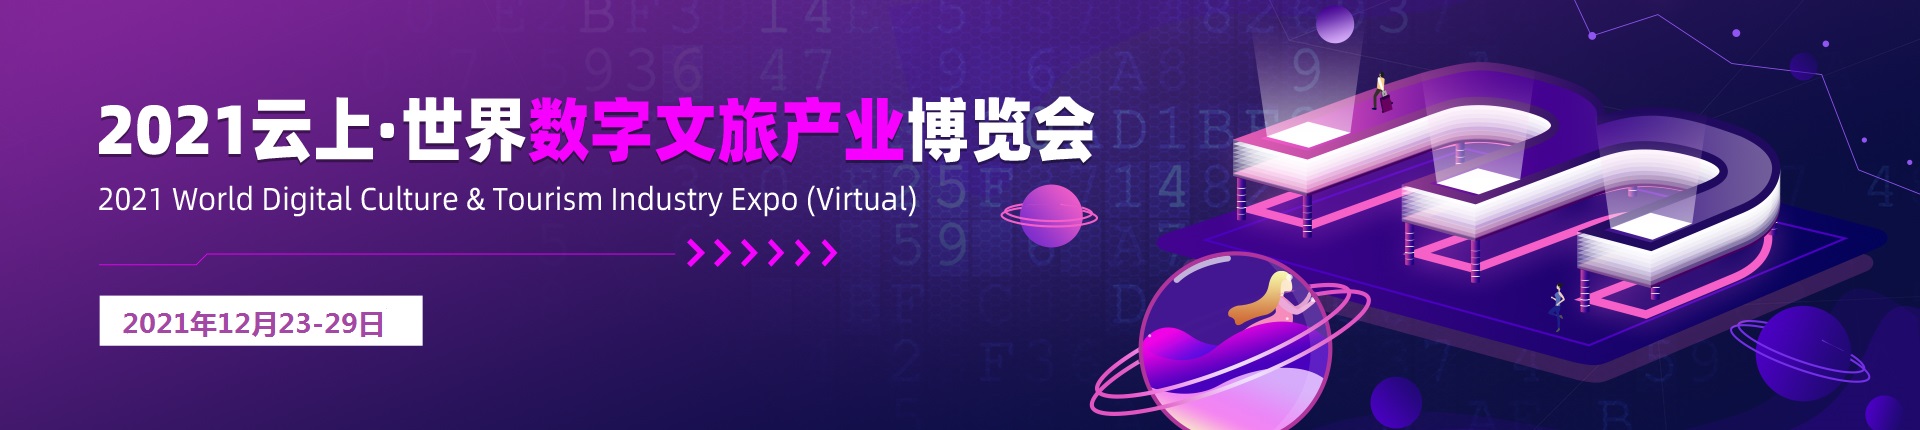 2021 World Digital Culture & Tourism Industry Expo (Virtual)